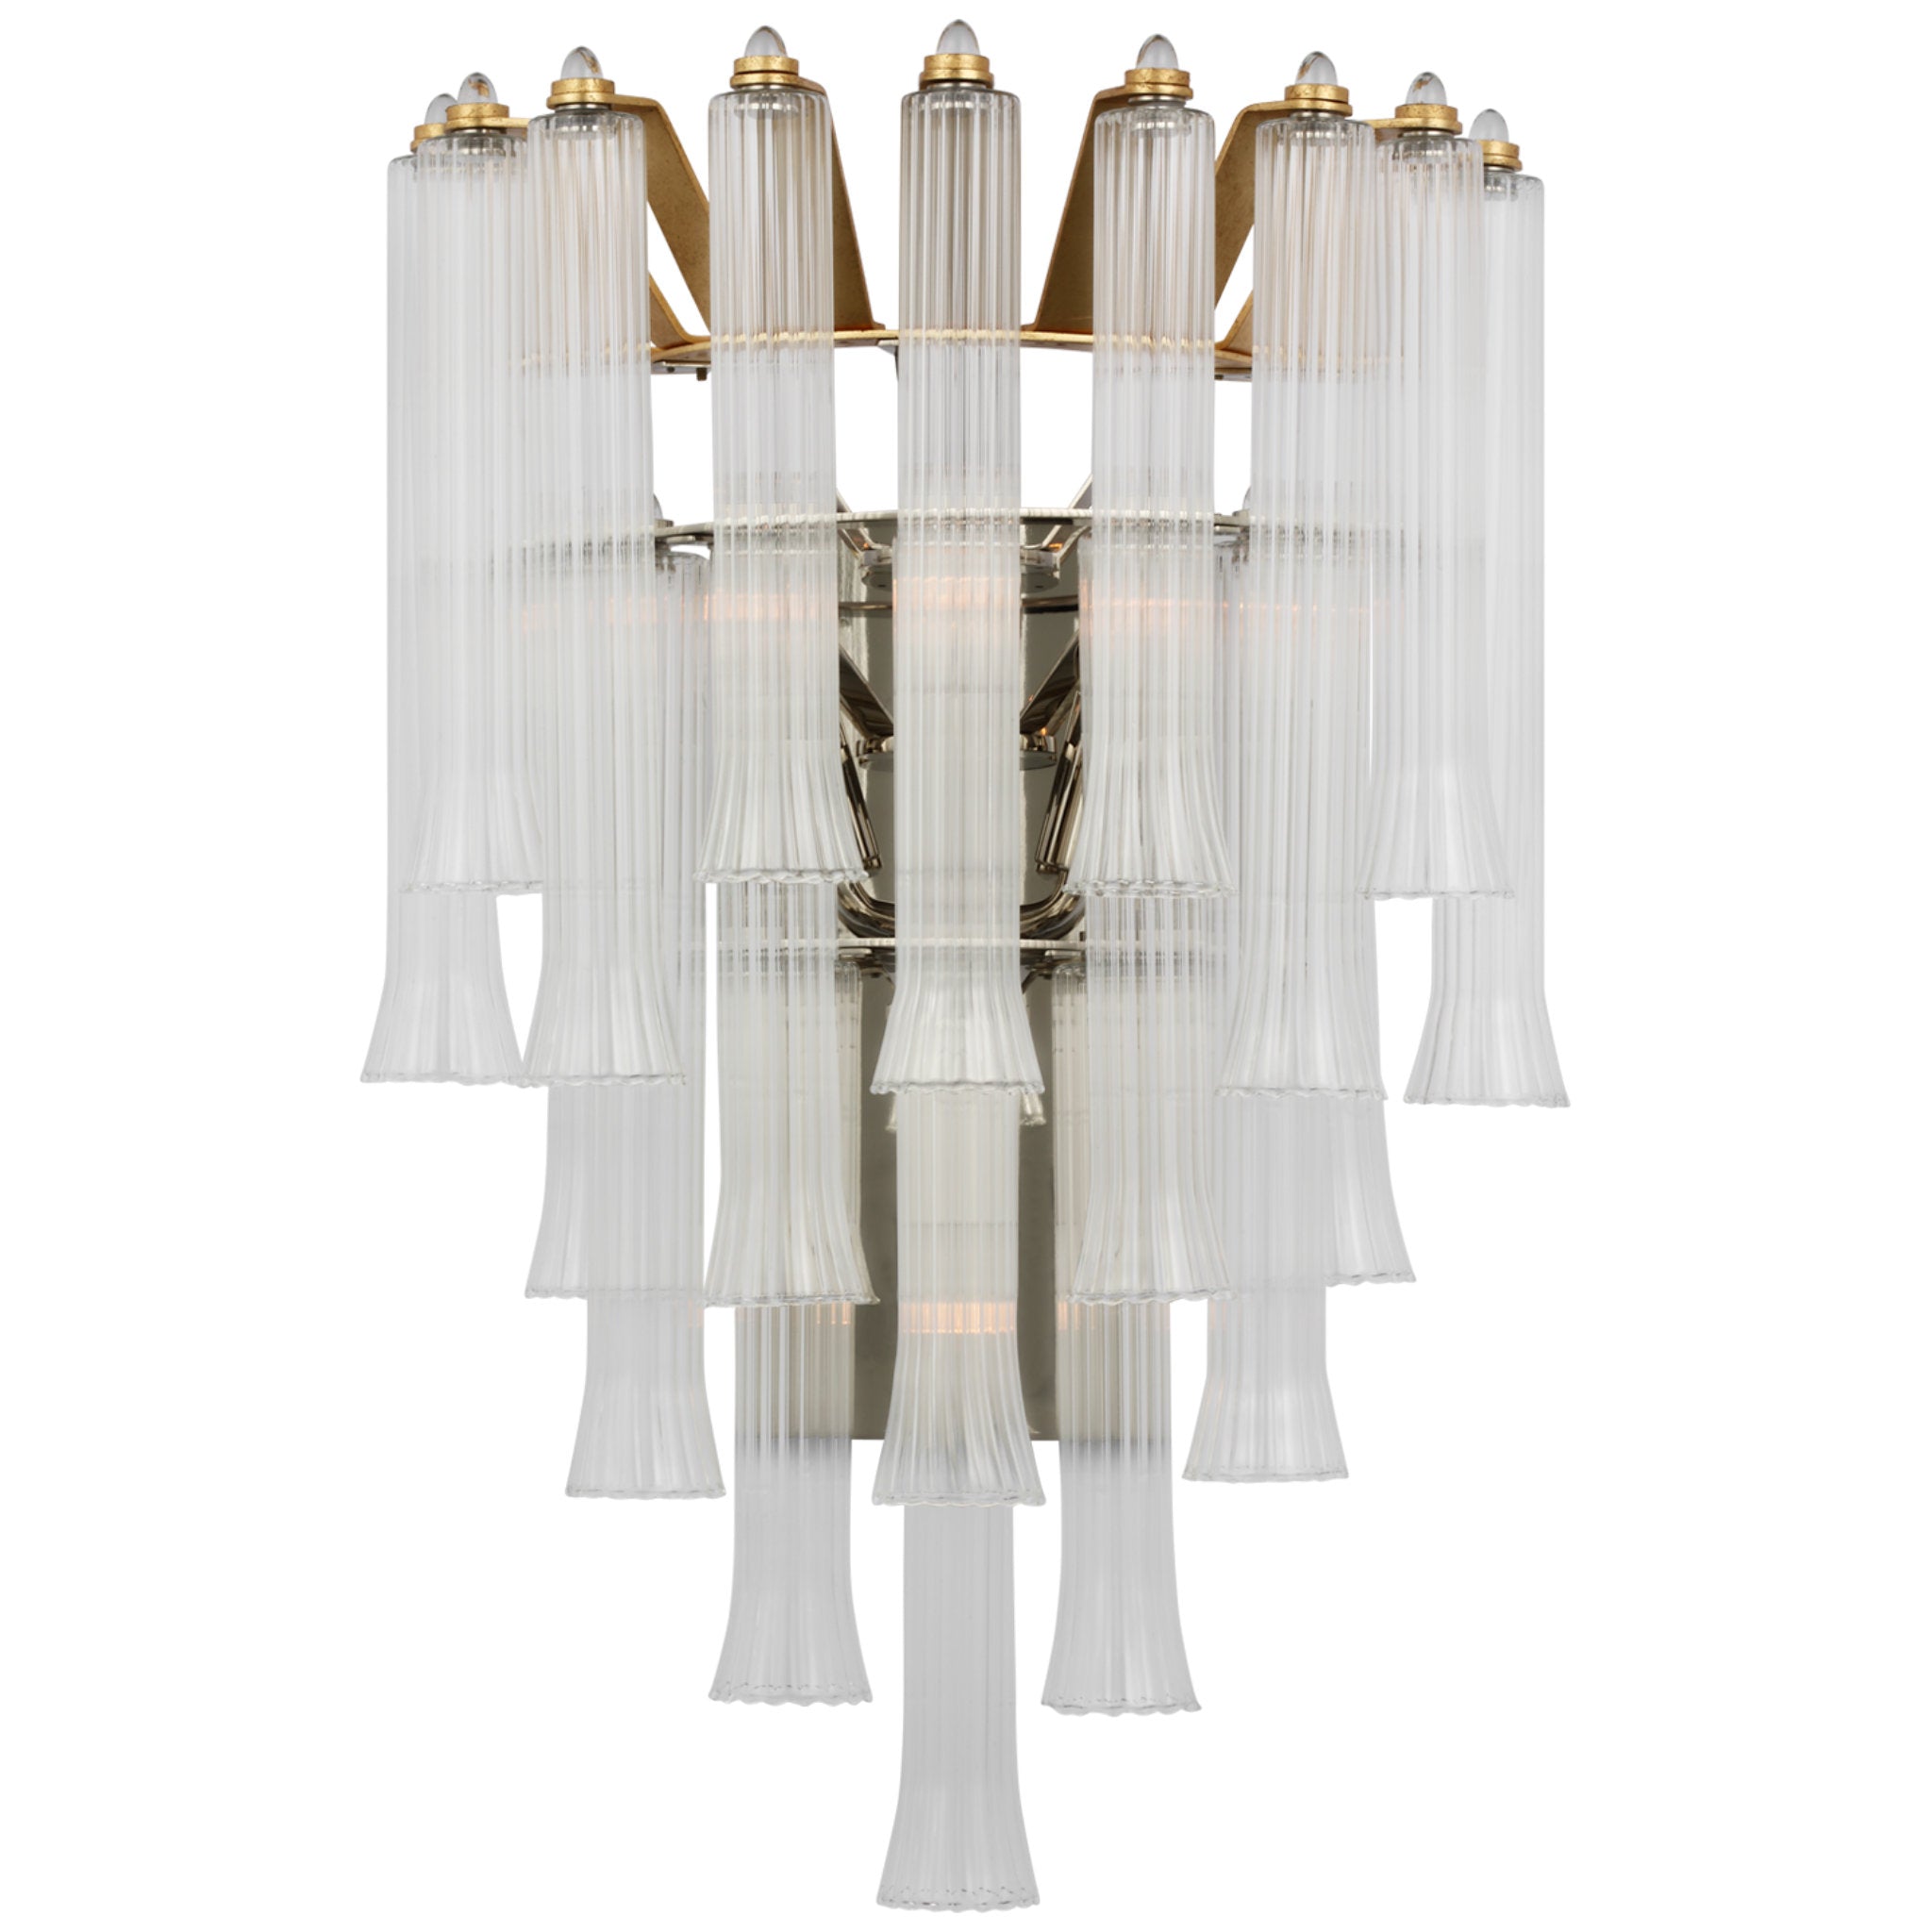 Julie Neill Lorelei Large Waterfall Sconce in Gild with Clear Glass